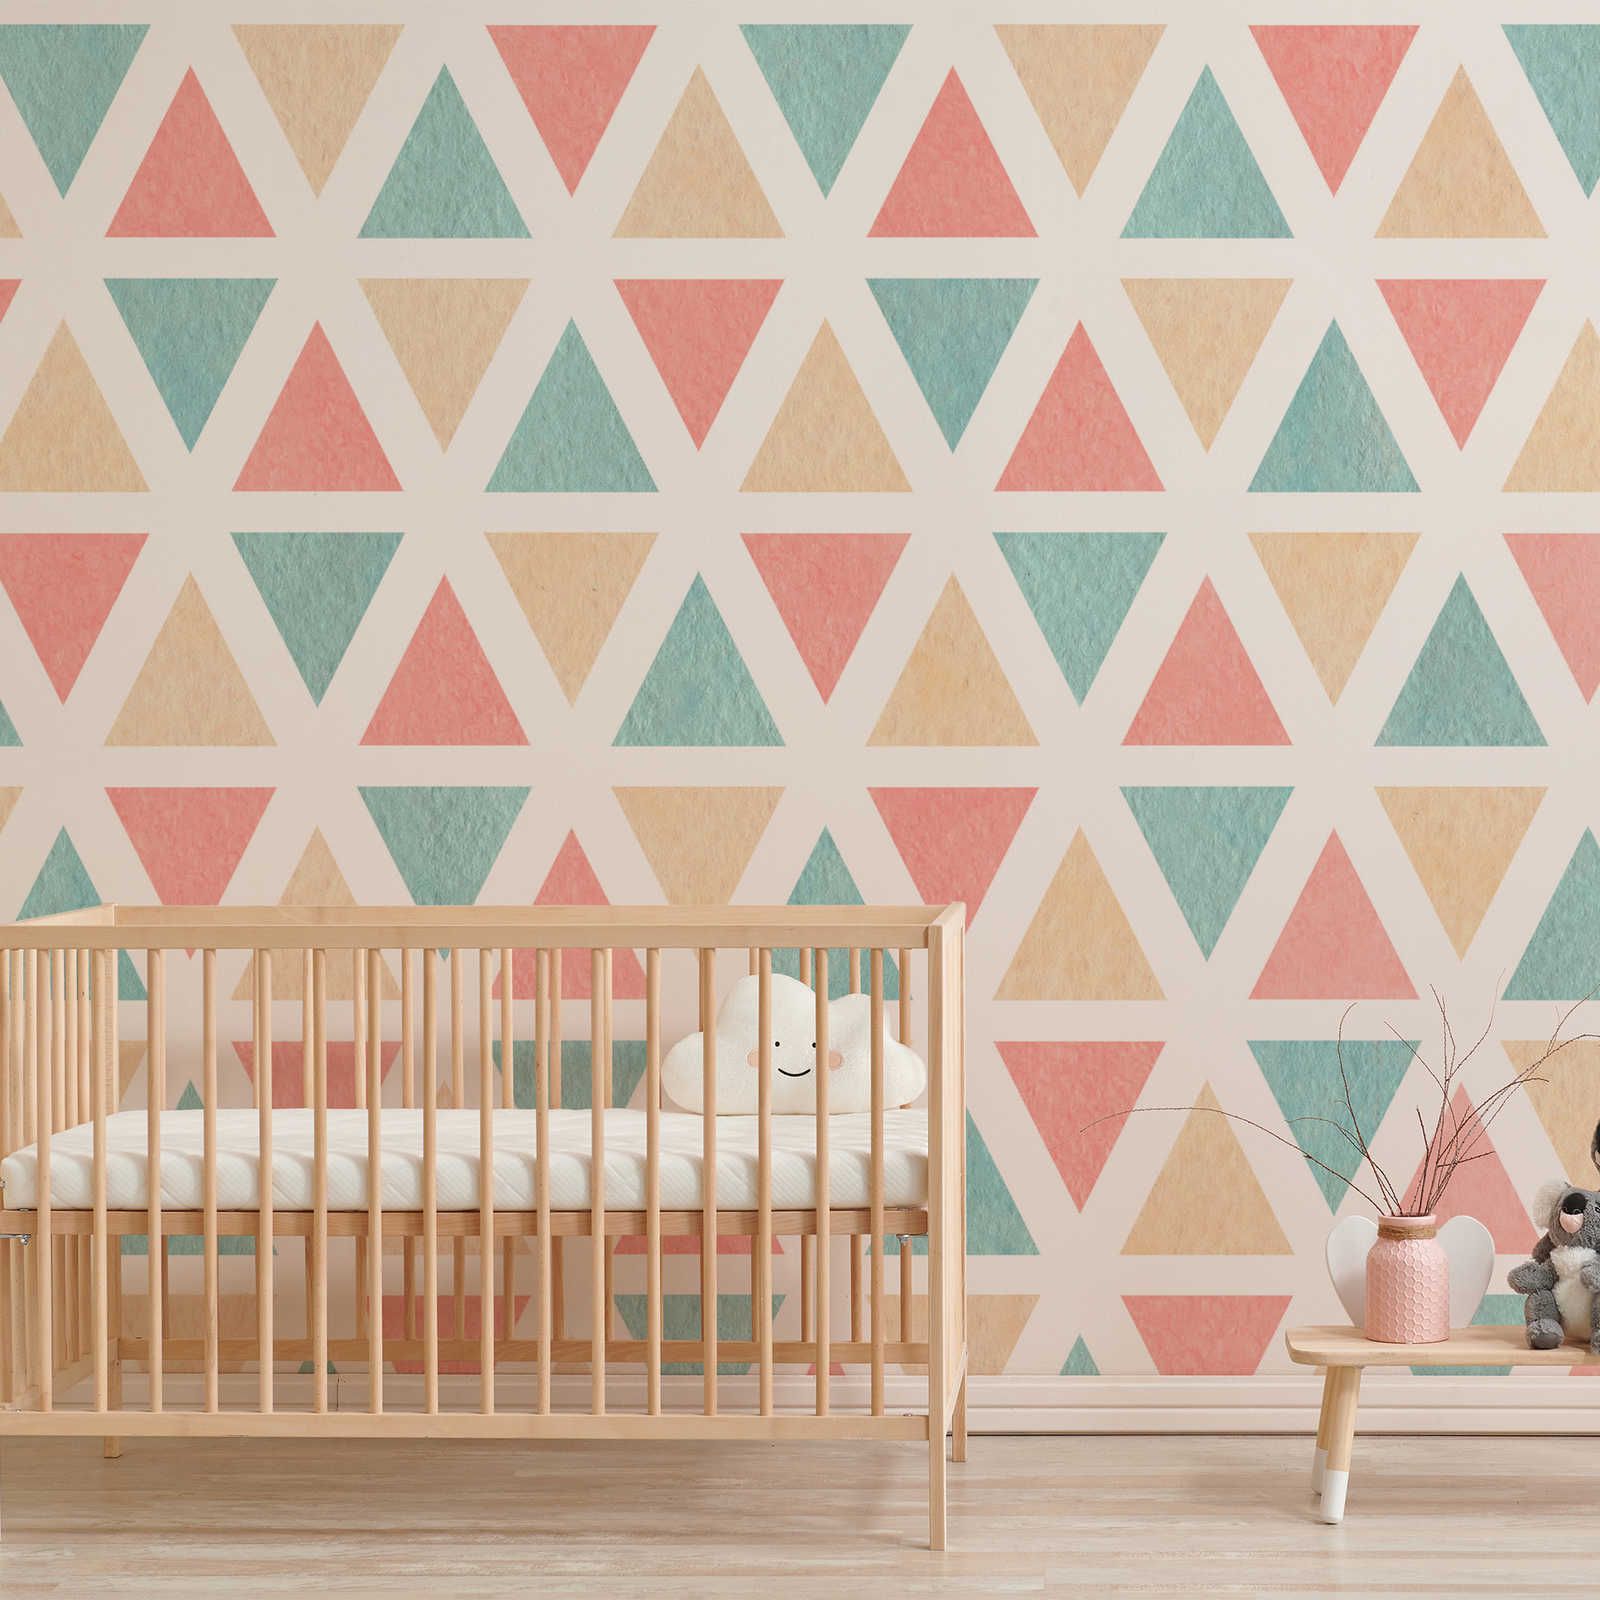 Photo wallpaper graphic pattern with colourful triangles - Smooth & matt non-woven
